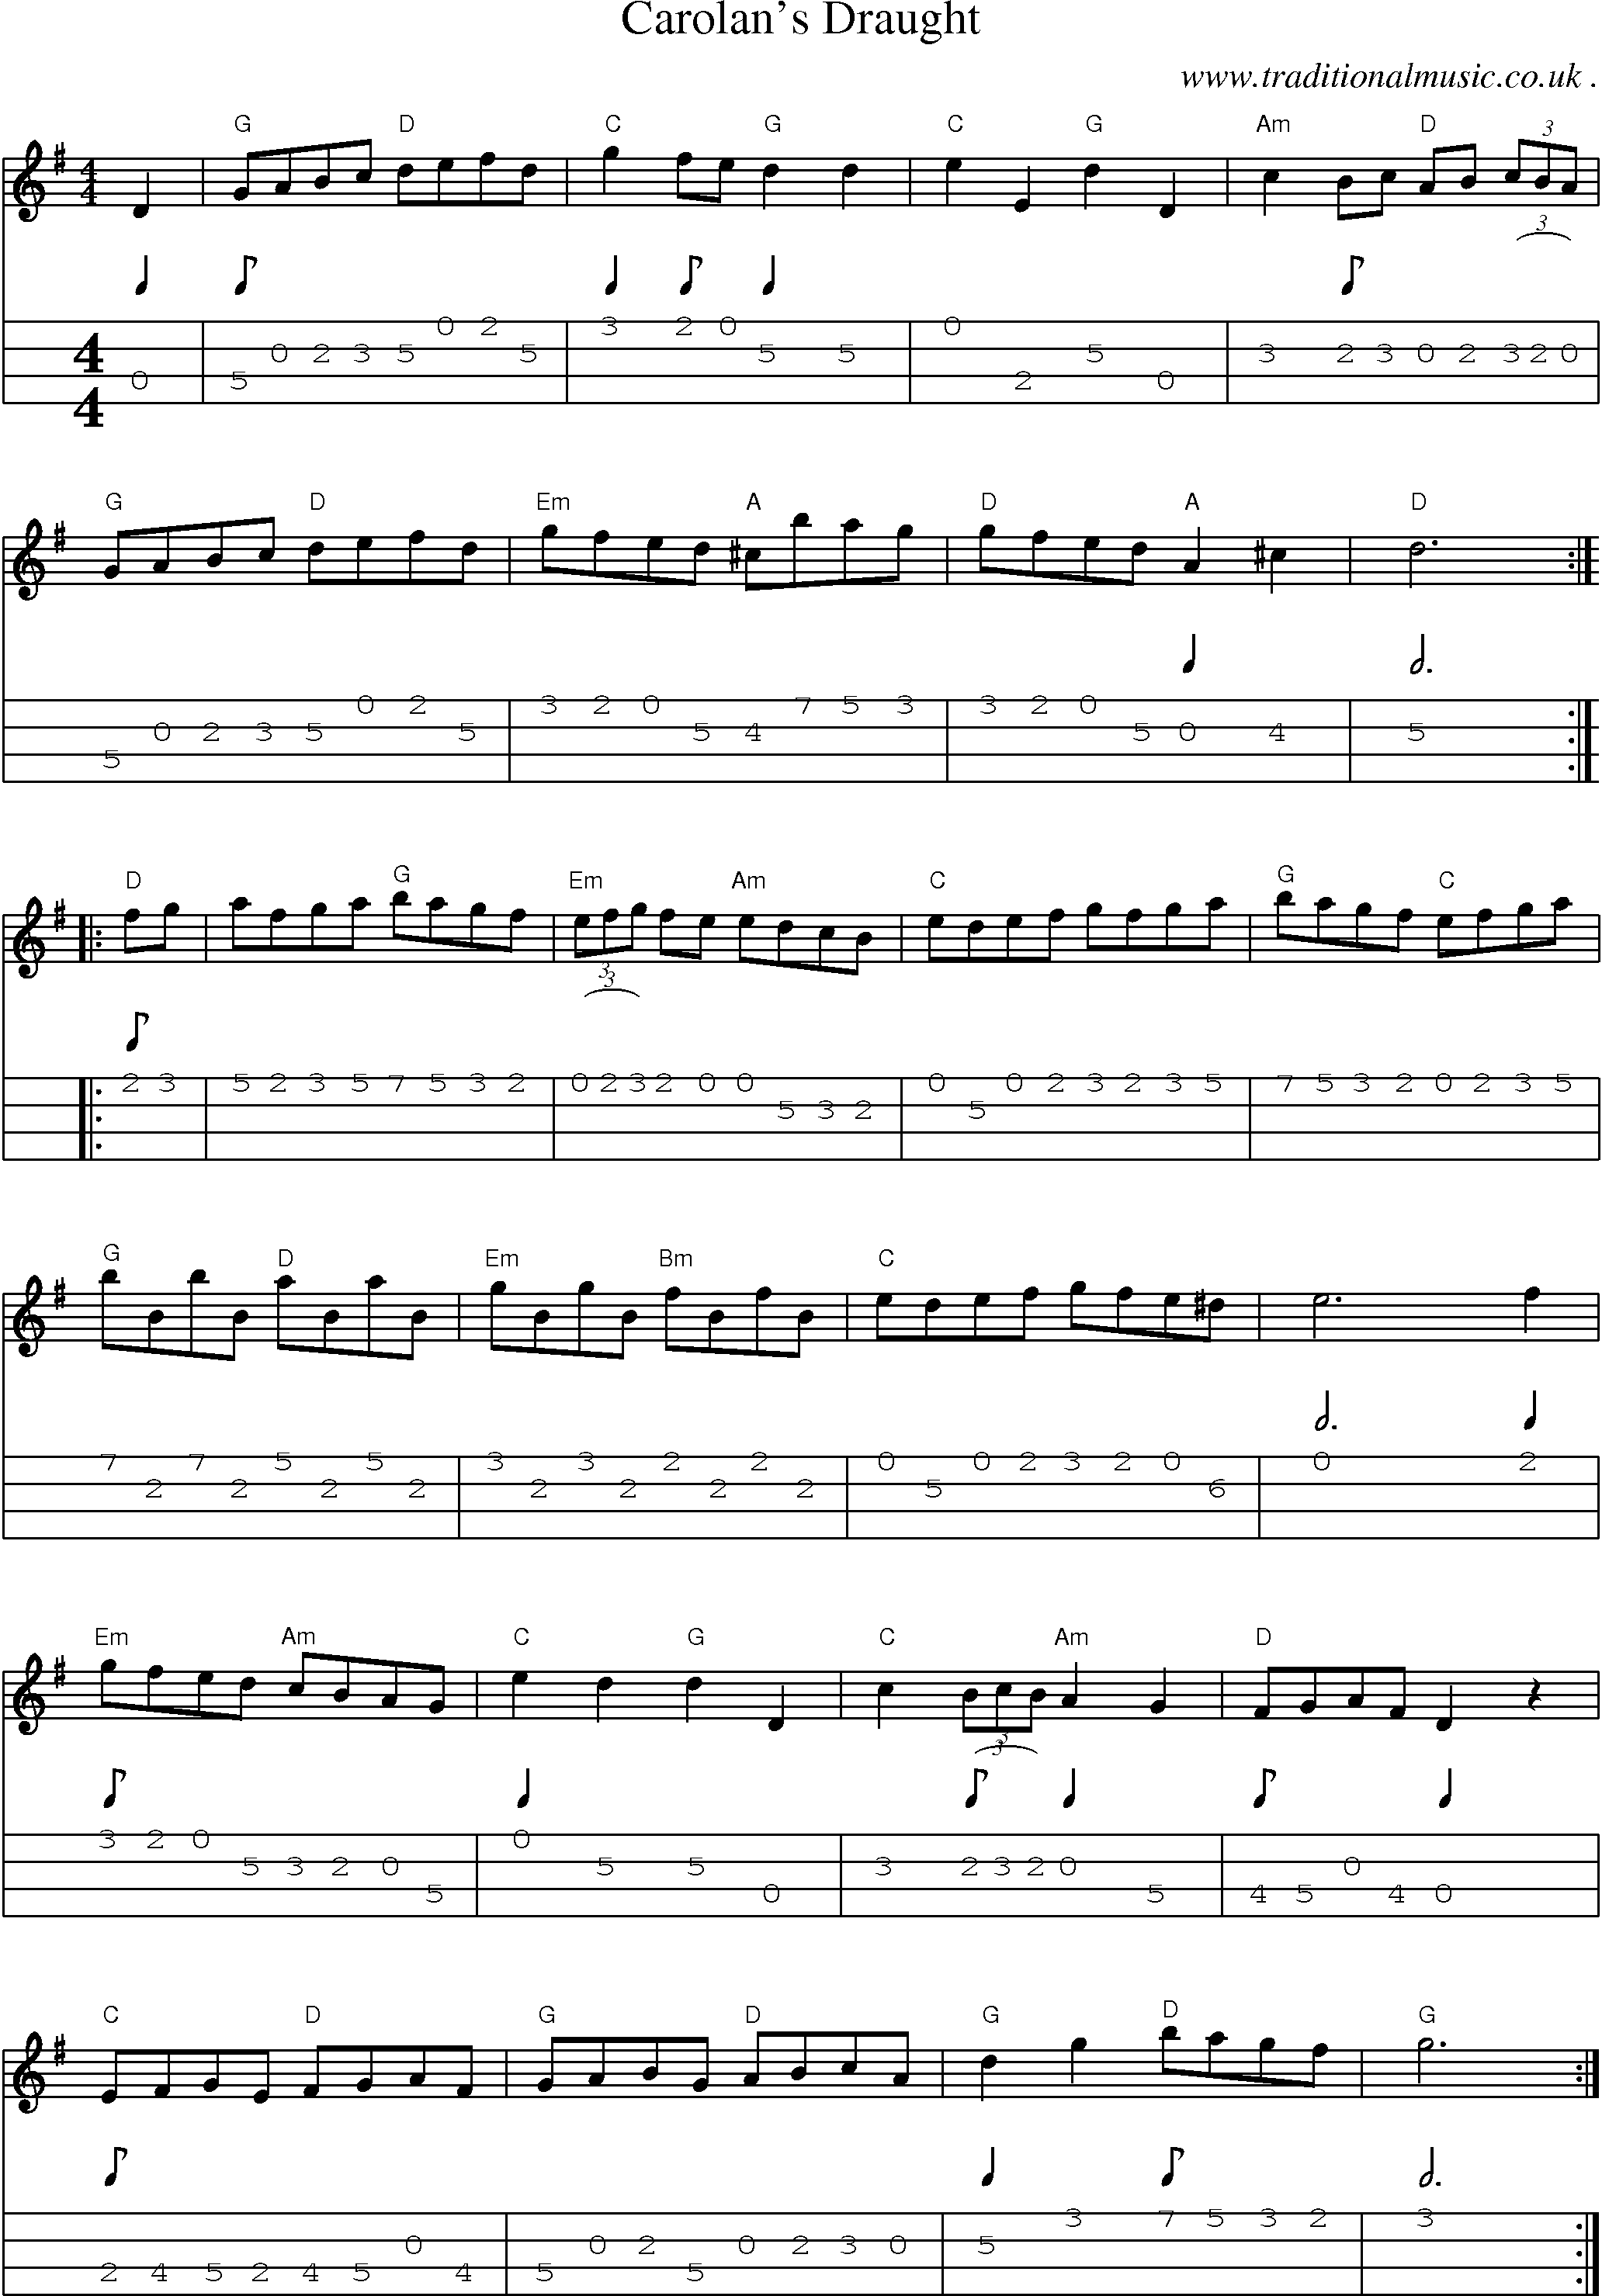 Sheet-music  score, Chords and Mandolin Tabs for Carolans Draught